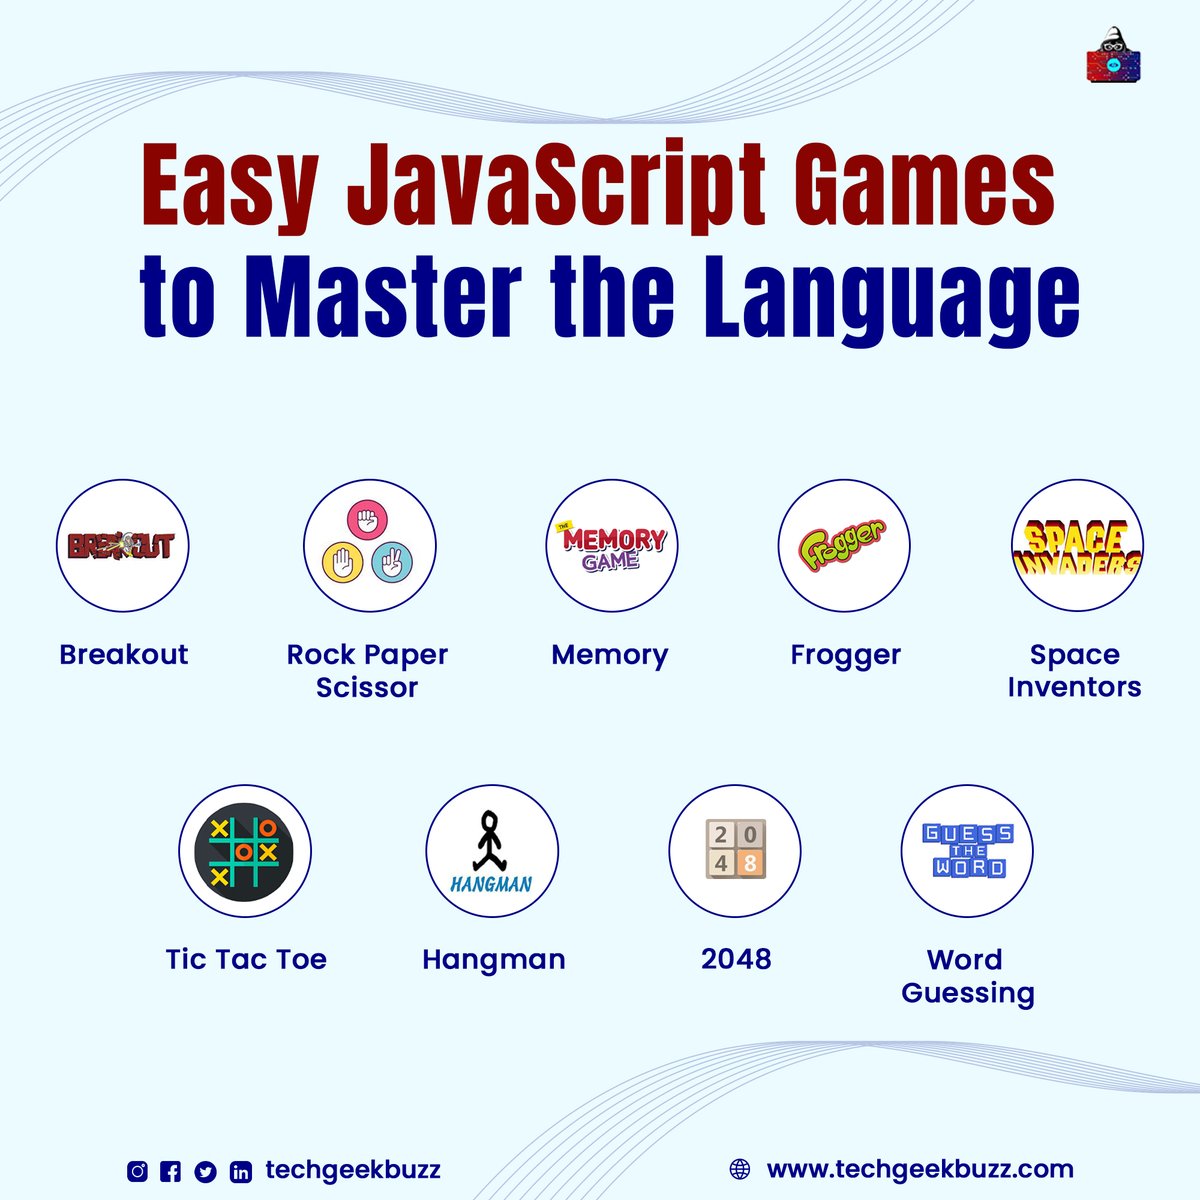 Level Up Your JavaScript Skills with Fun and Easy Games! 🎮🚀 These simple, yet engaging games are the perfect way to master the language. Get ready to code, play, and learn!

#JavaScriptGames #LearnJavaScript #CodingGames #WebDevelopment #GameDevelopment #JavaScriptMastery